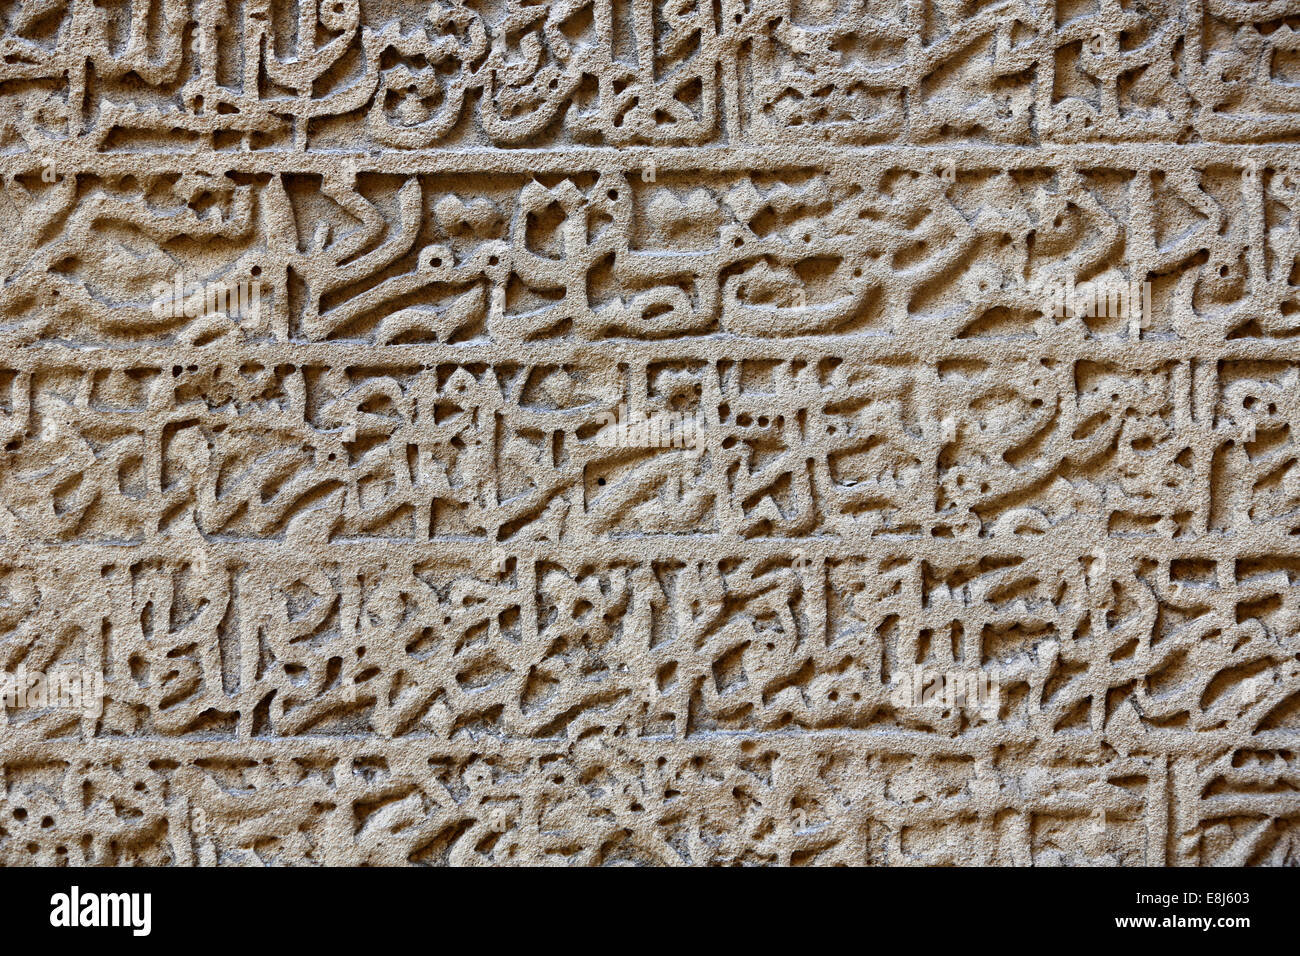 Sculpted islamic calligraphy Stock Photo